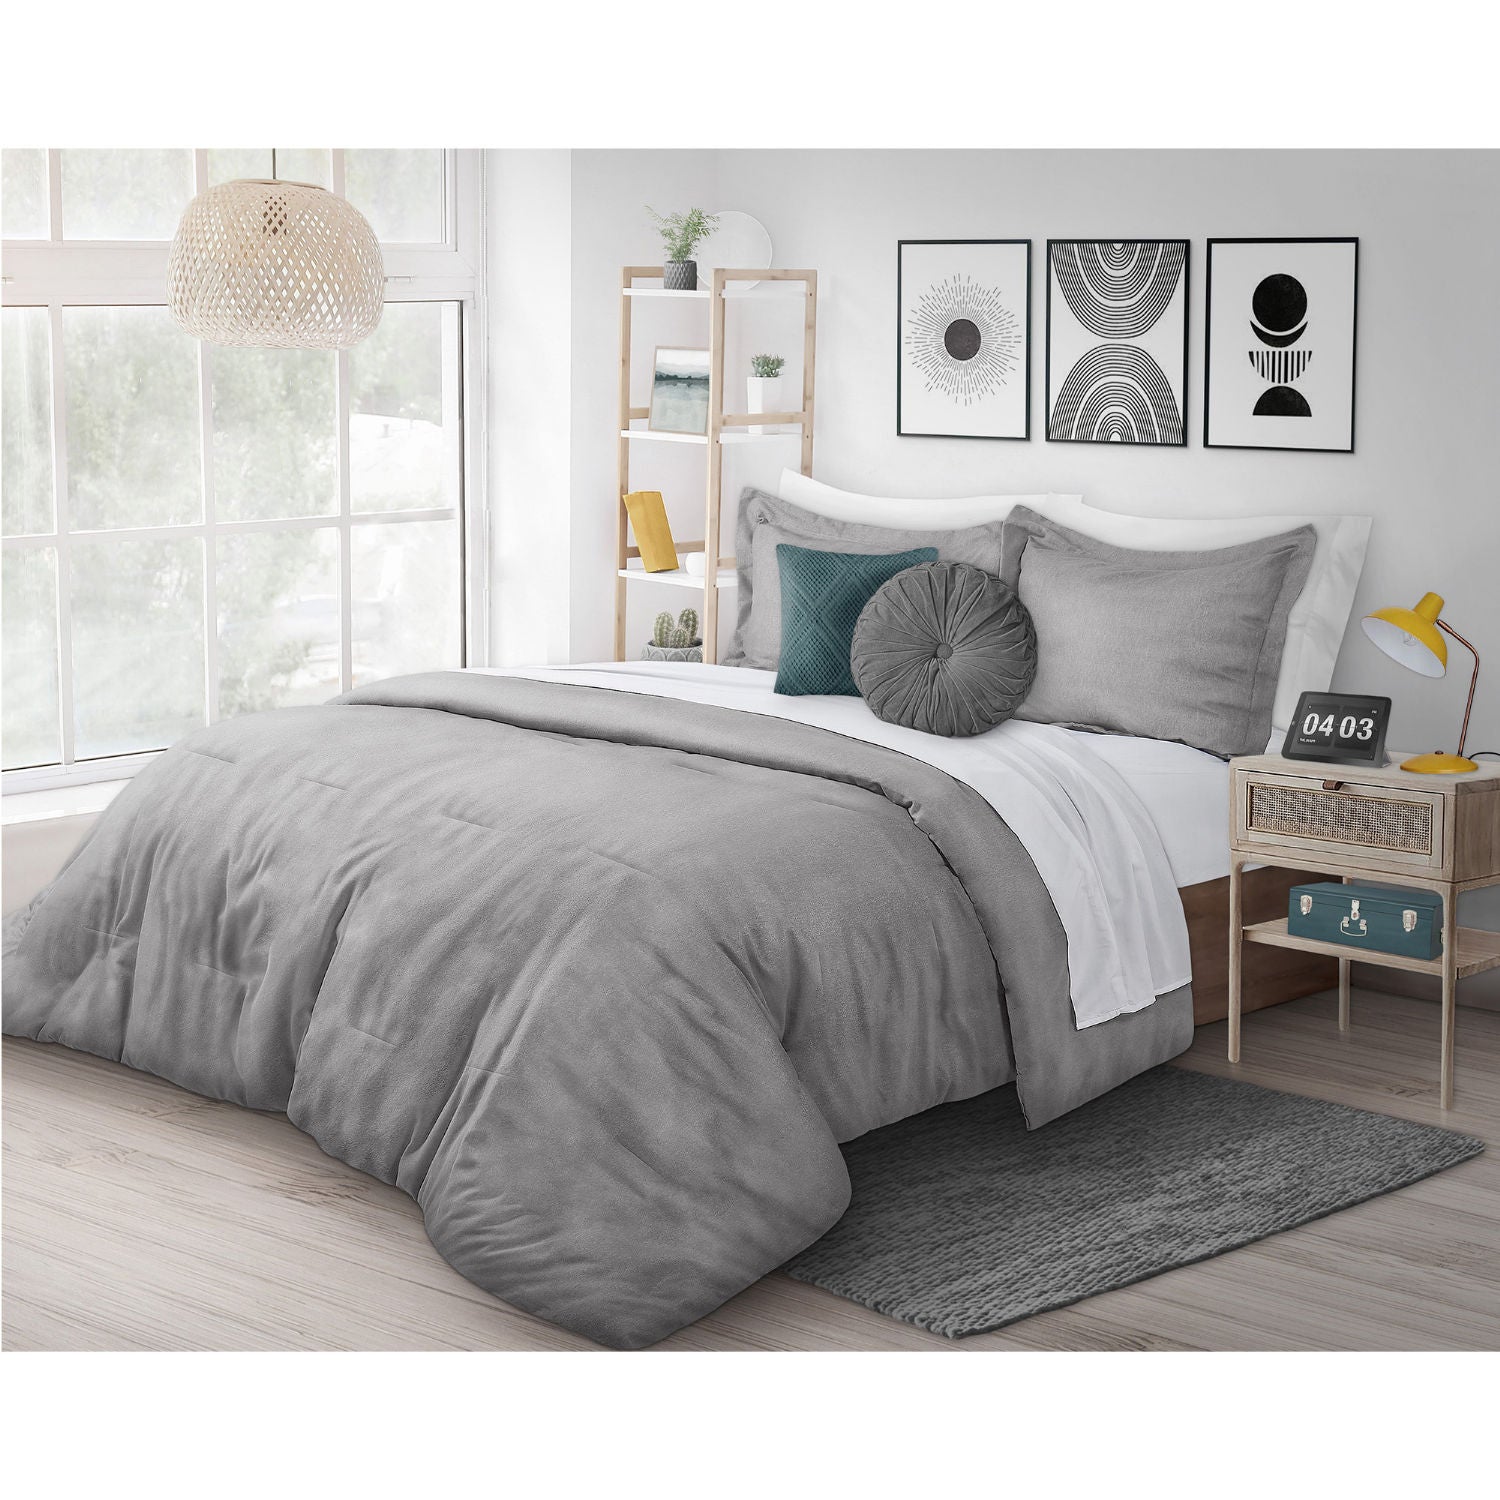 Woven Heathered Flannel Comforter 2 Pc Set Dq. Warm Grey